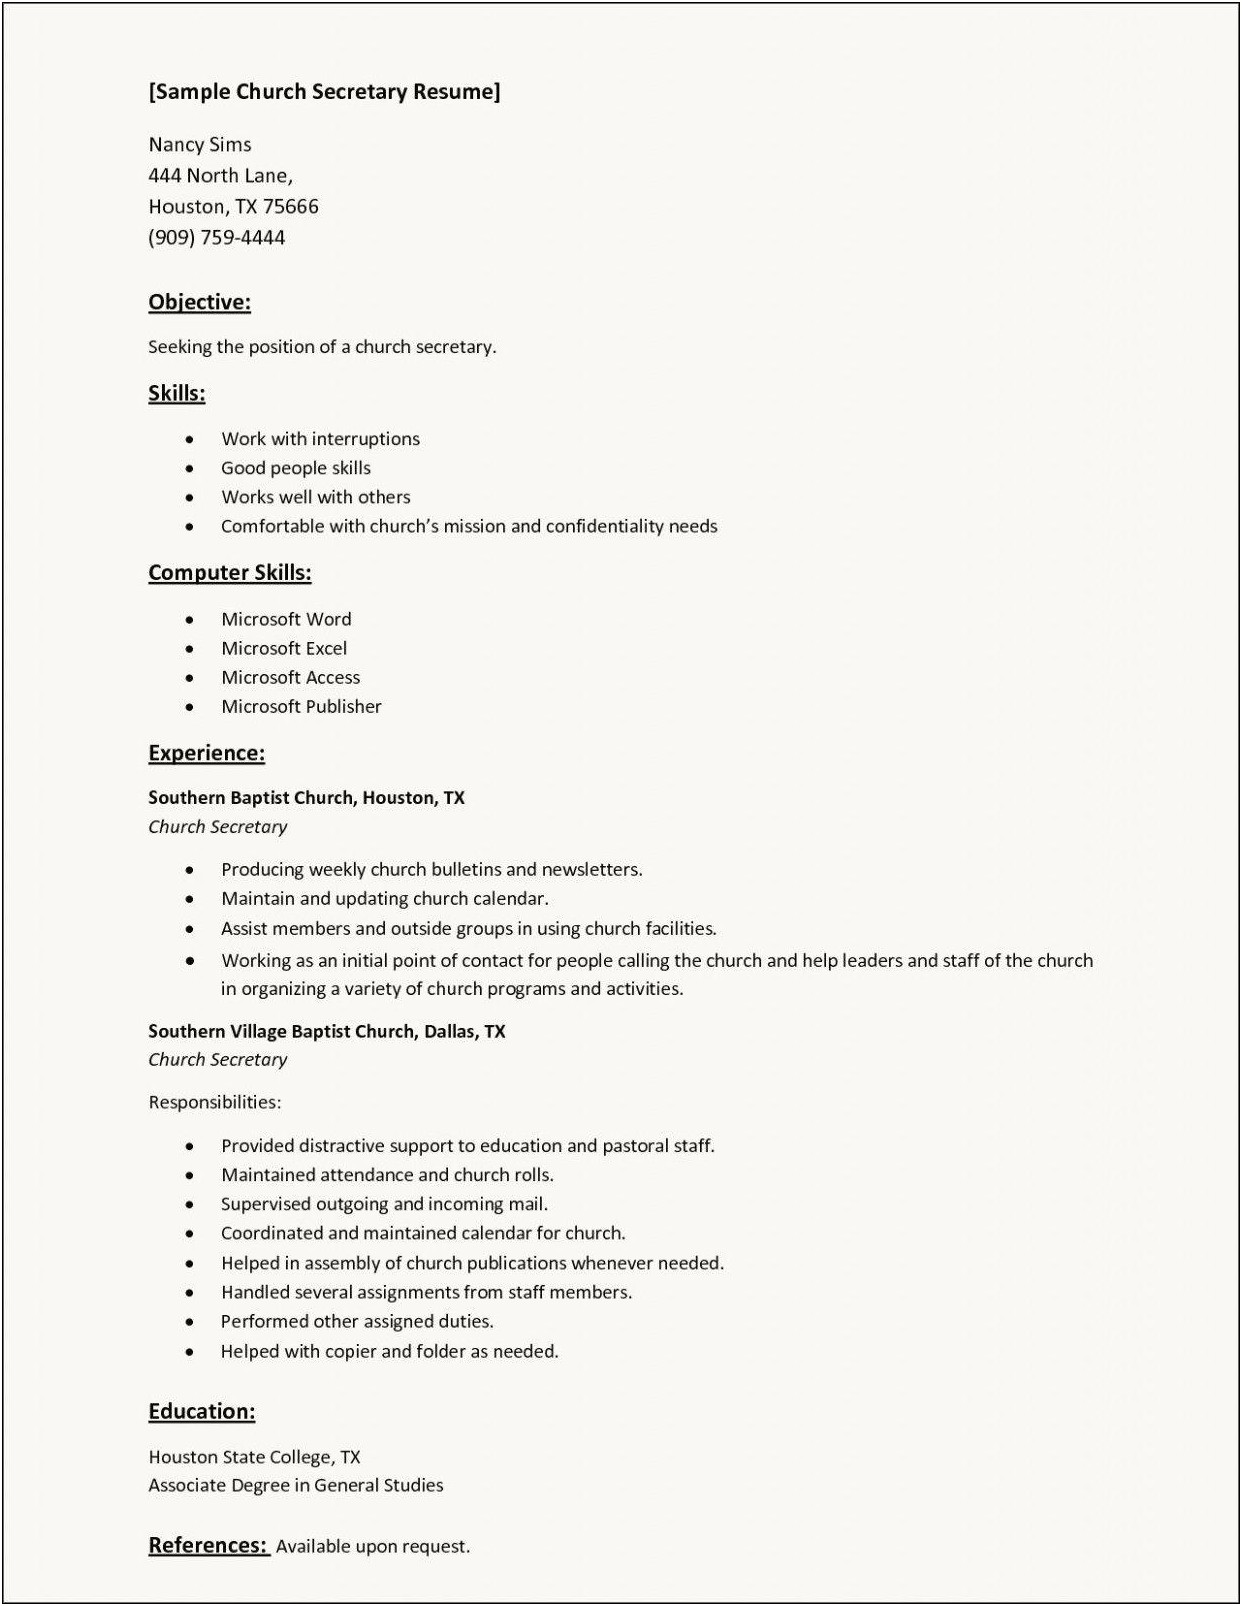 Resume Skills And Outside Activities